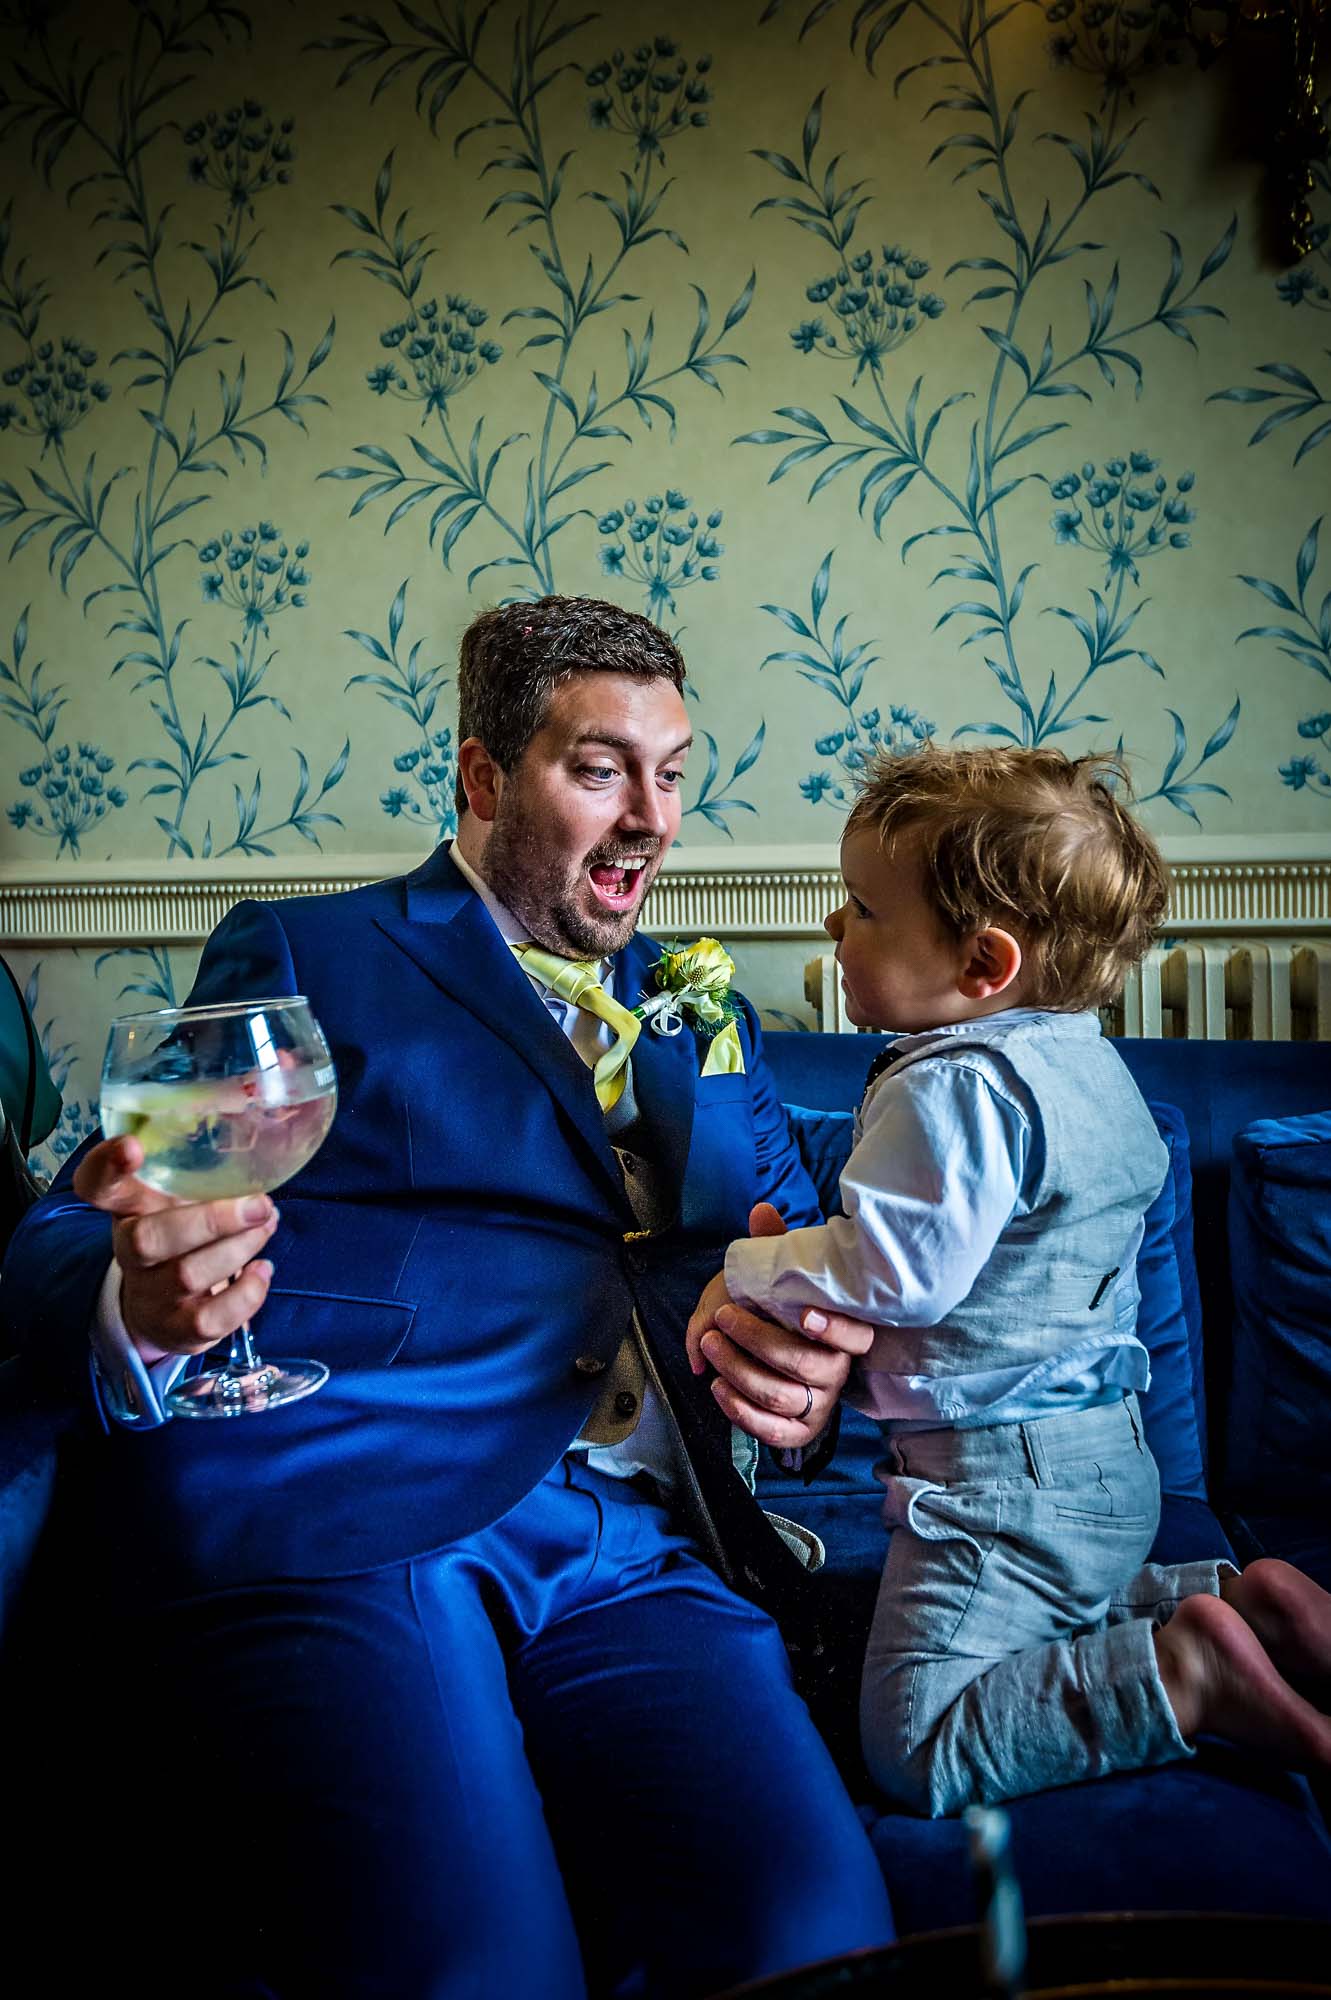 The groom interacting with toddler at wedding